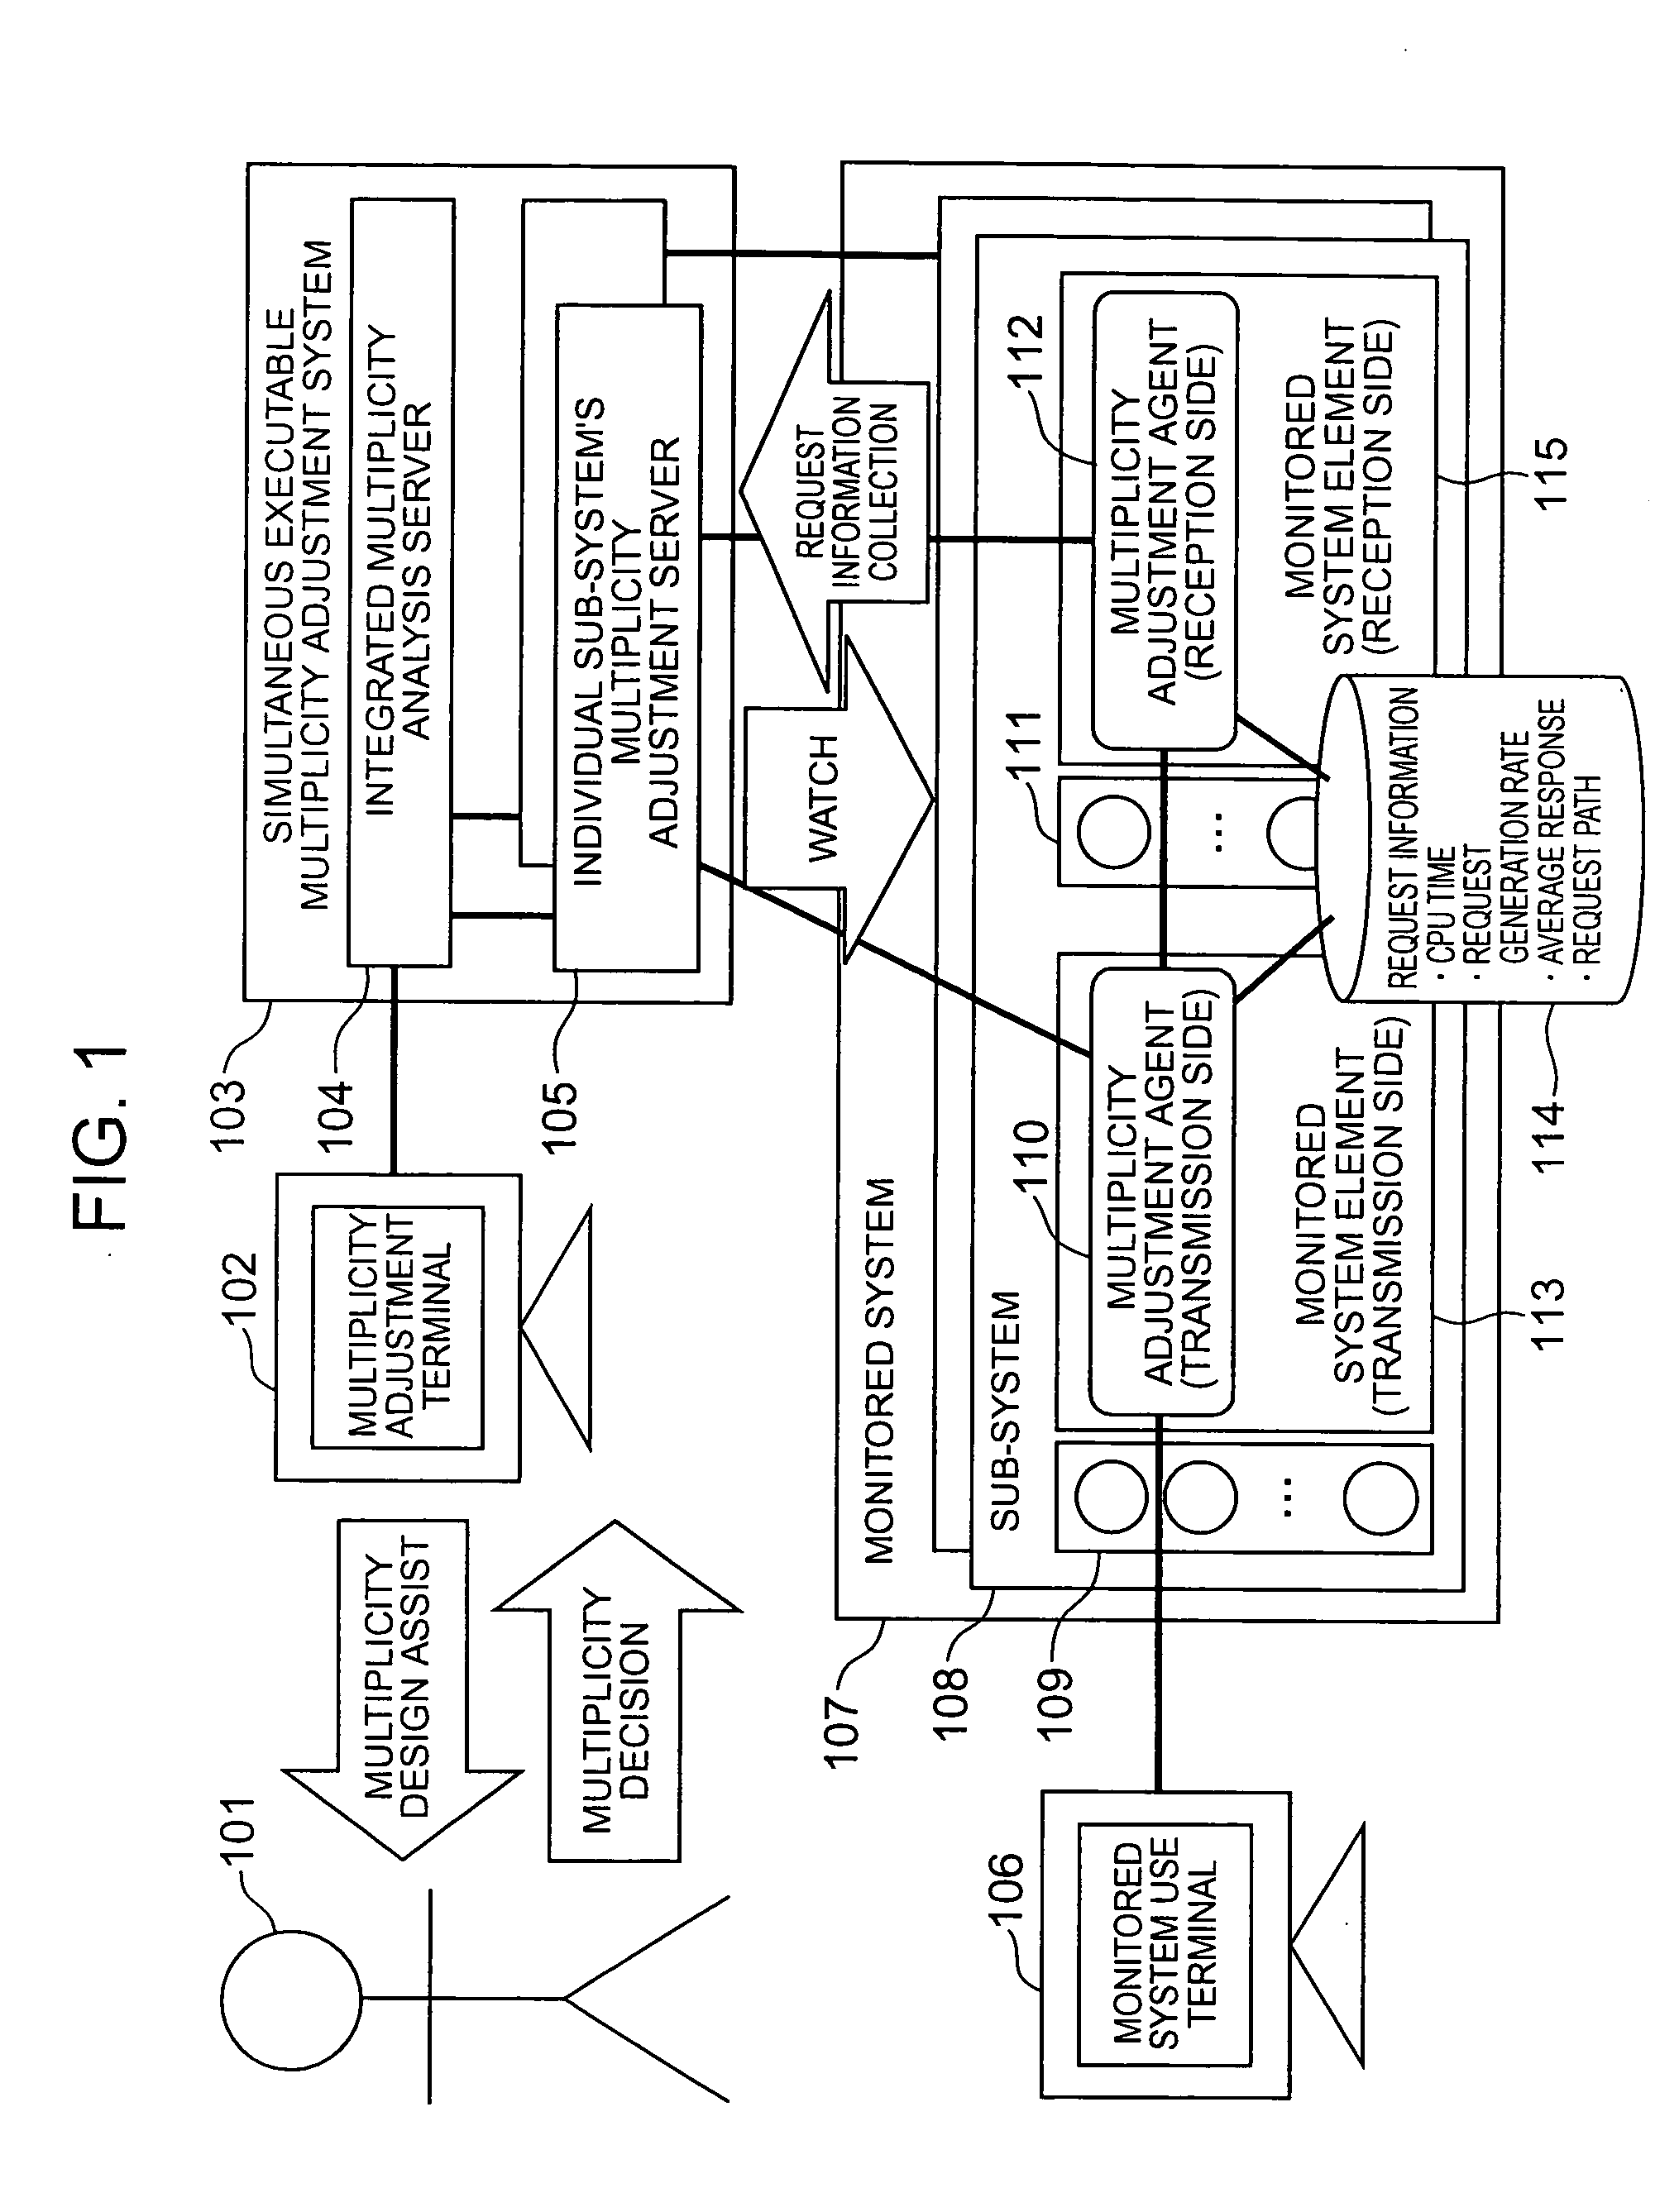 Multiplicity adjustment system and method